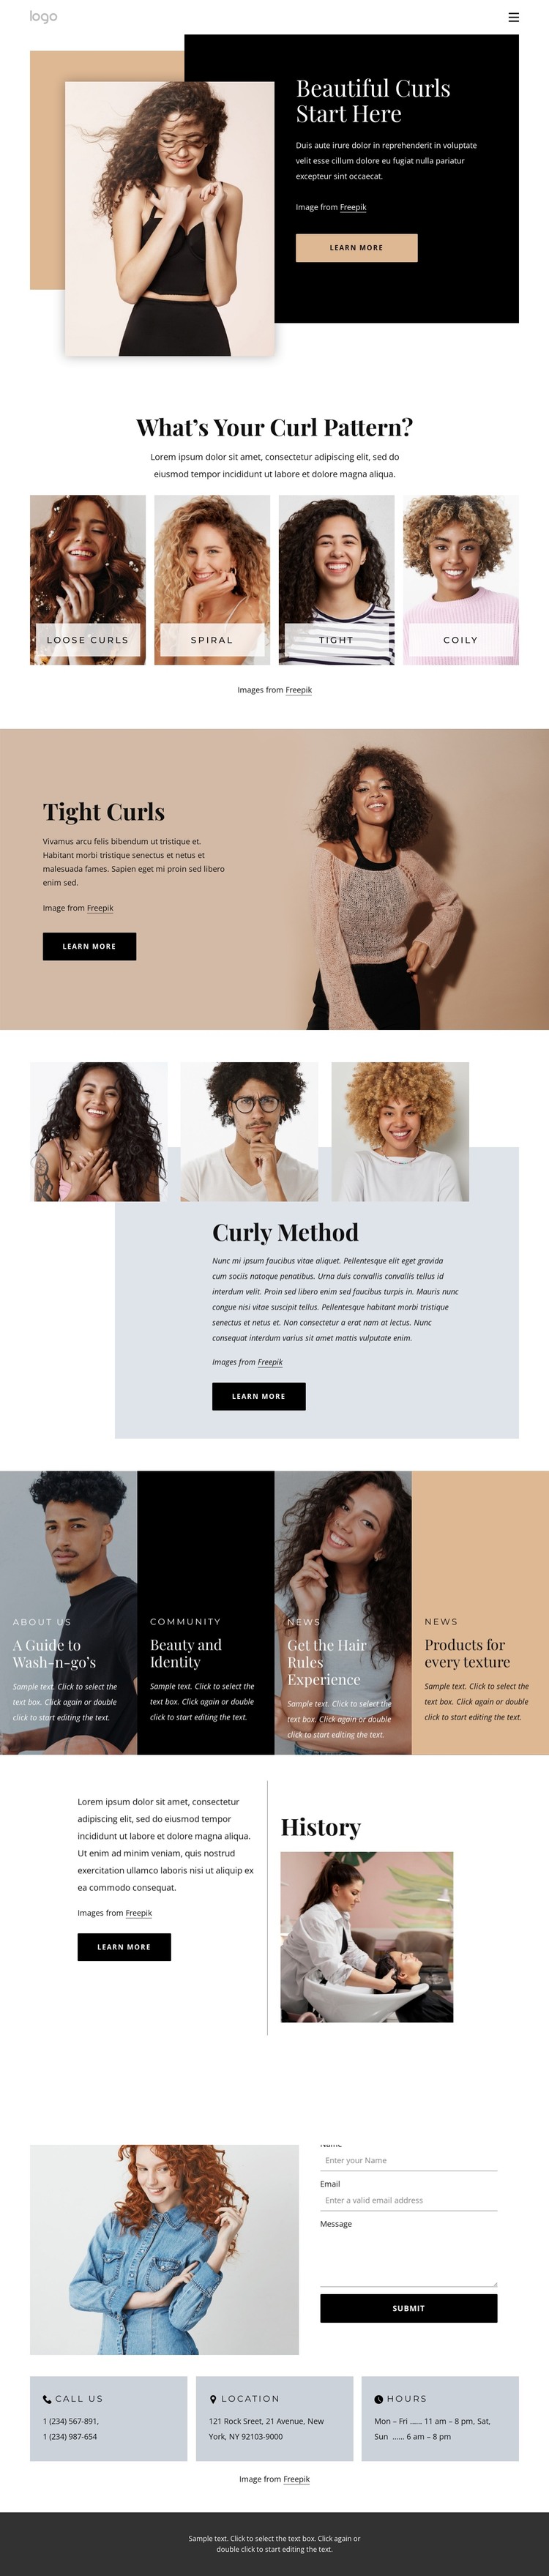 Bring out the best in your curls Web Design